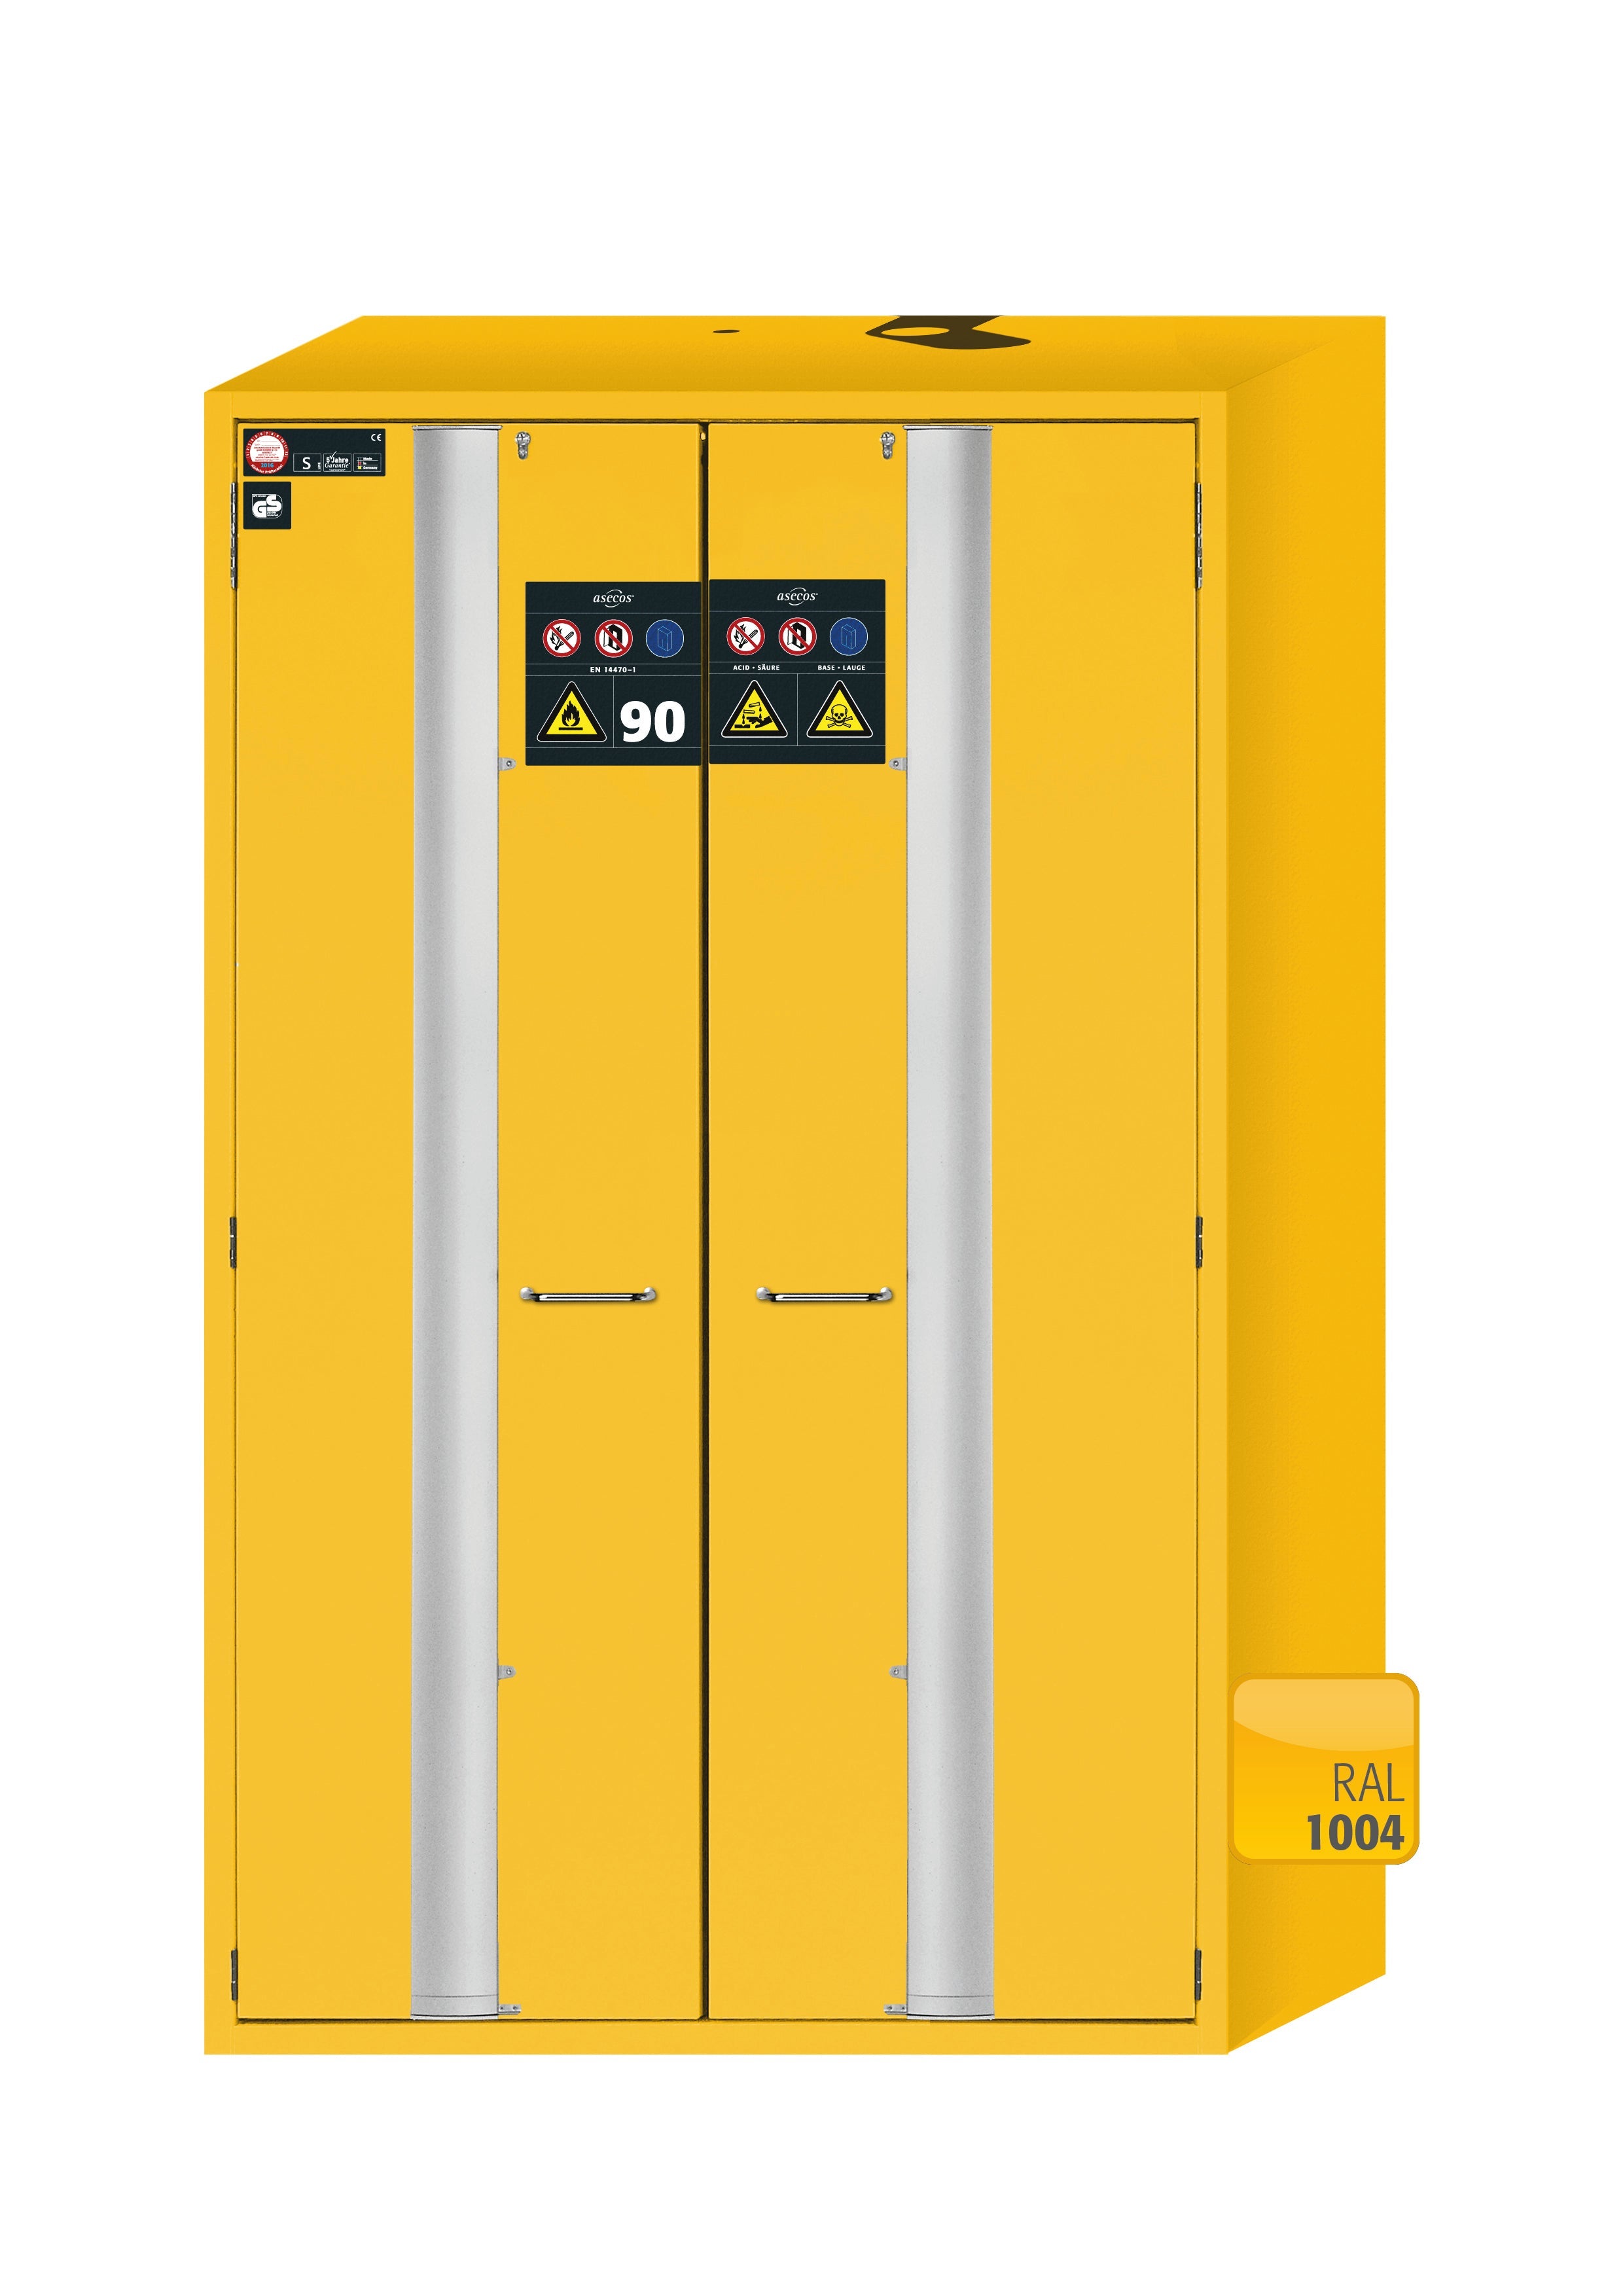 Type 90 safety cabinet S-PHOENIX-90 model S90.196.120.MV.FDAS in safety yellow RAL 1004 with 6x standard pull-out tray (stainless steel 1.4301)